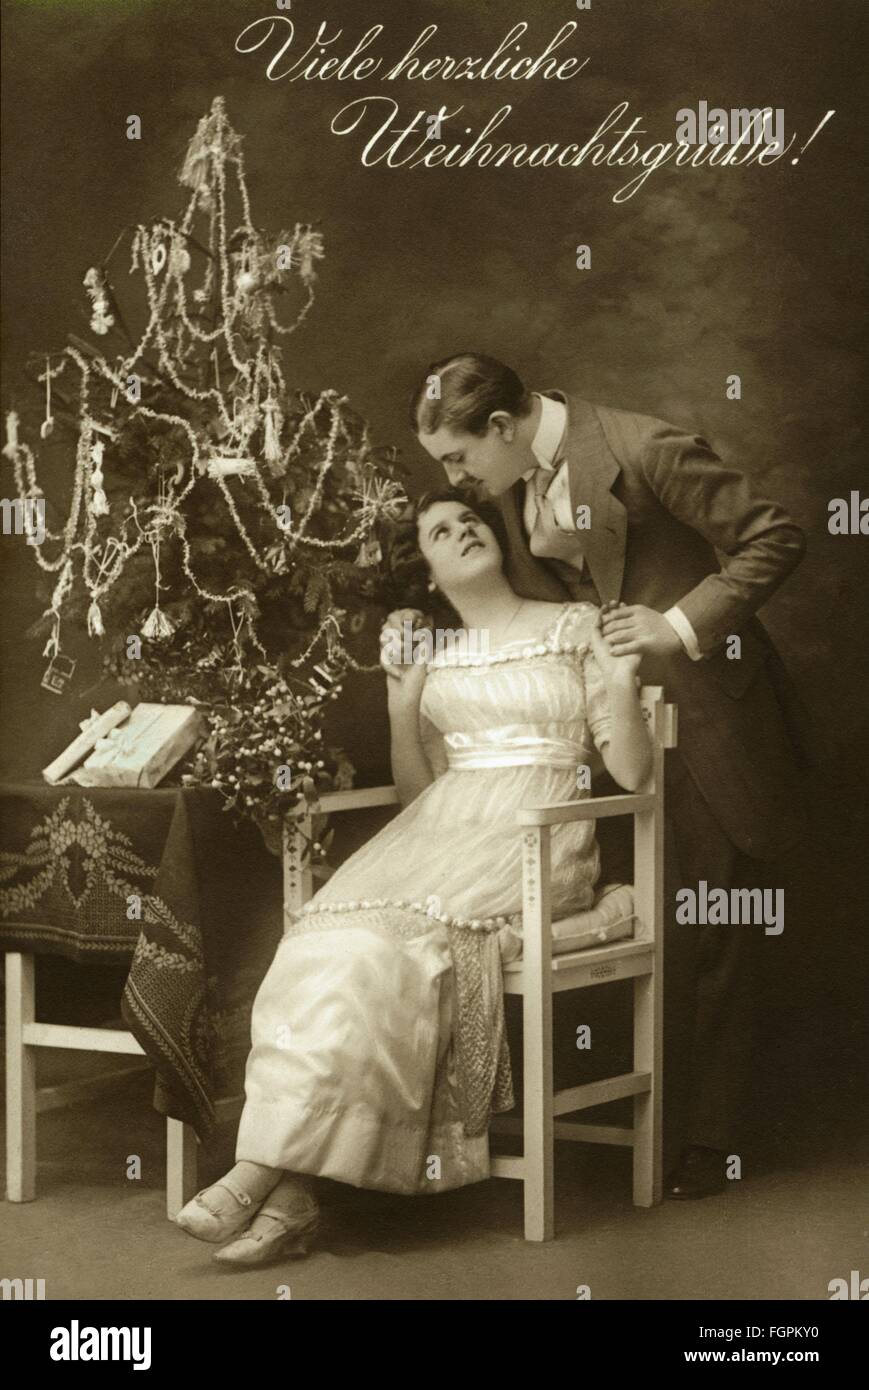 Christmas, Christmas Eve, 'Viele herzliche Weihnachtsgruesse', couple celebrating Christmas, presents under the Christmas tree, postcard, Austria, 1914, Additional-Rights-Clearences-Not Available Stock Photo